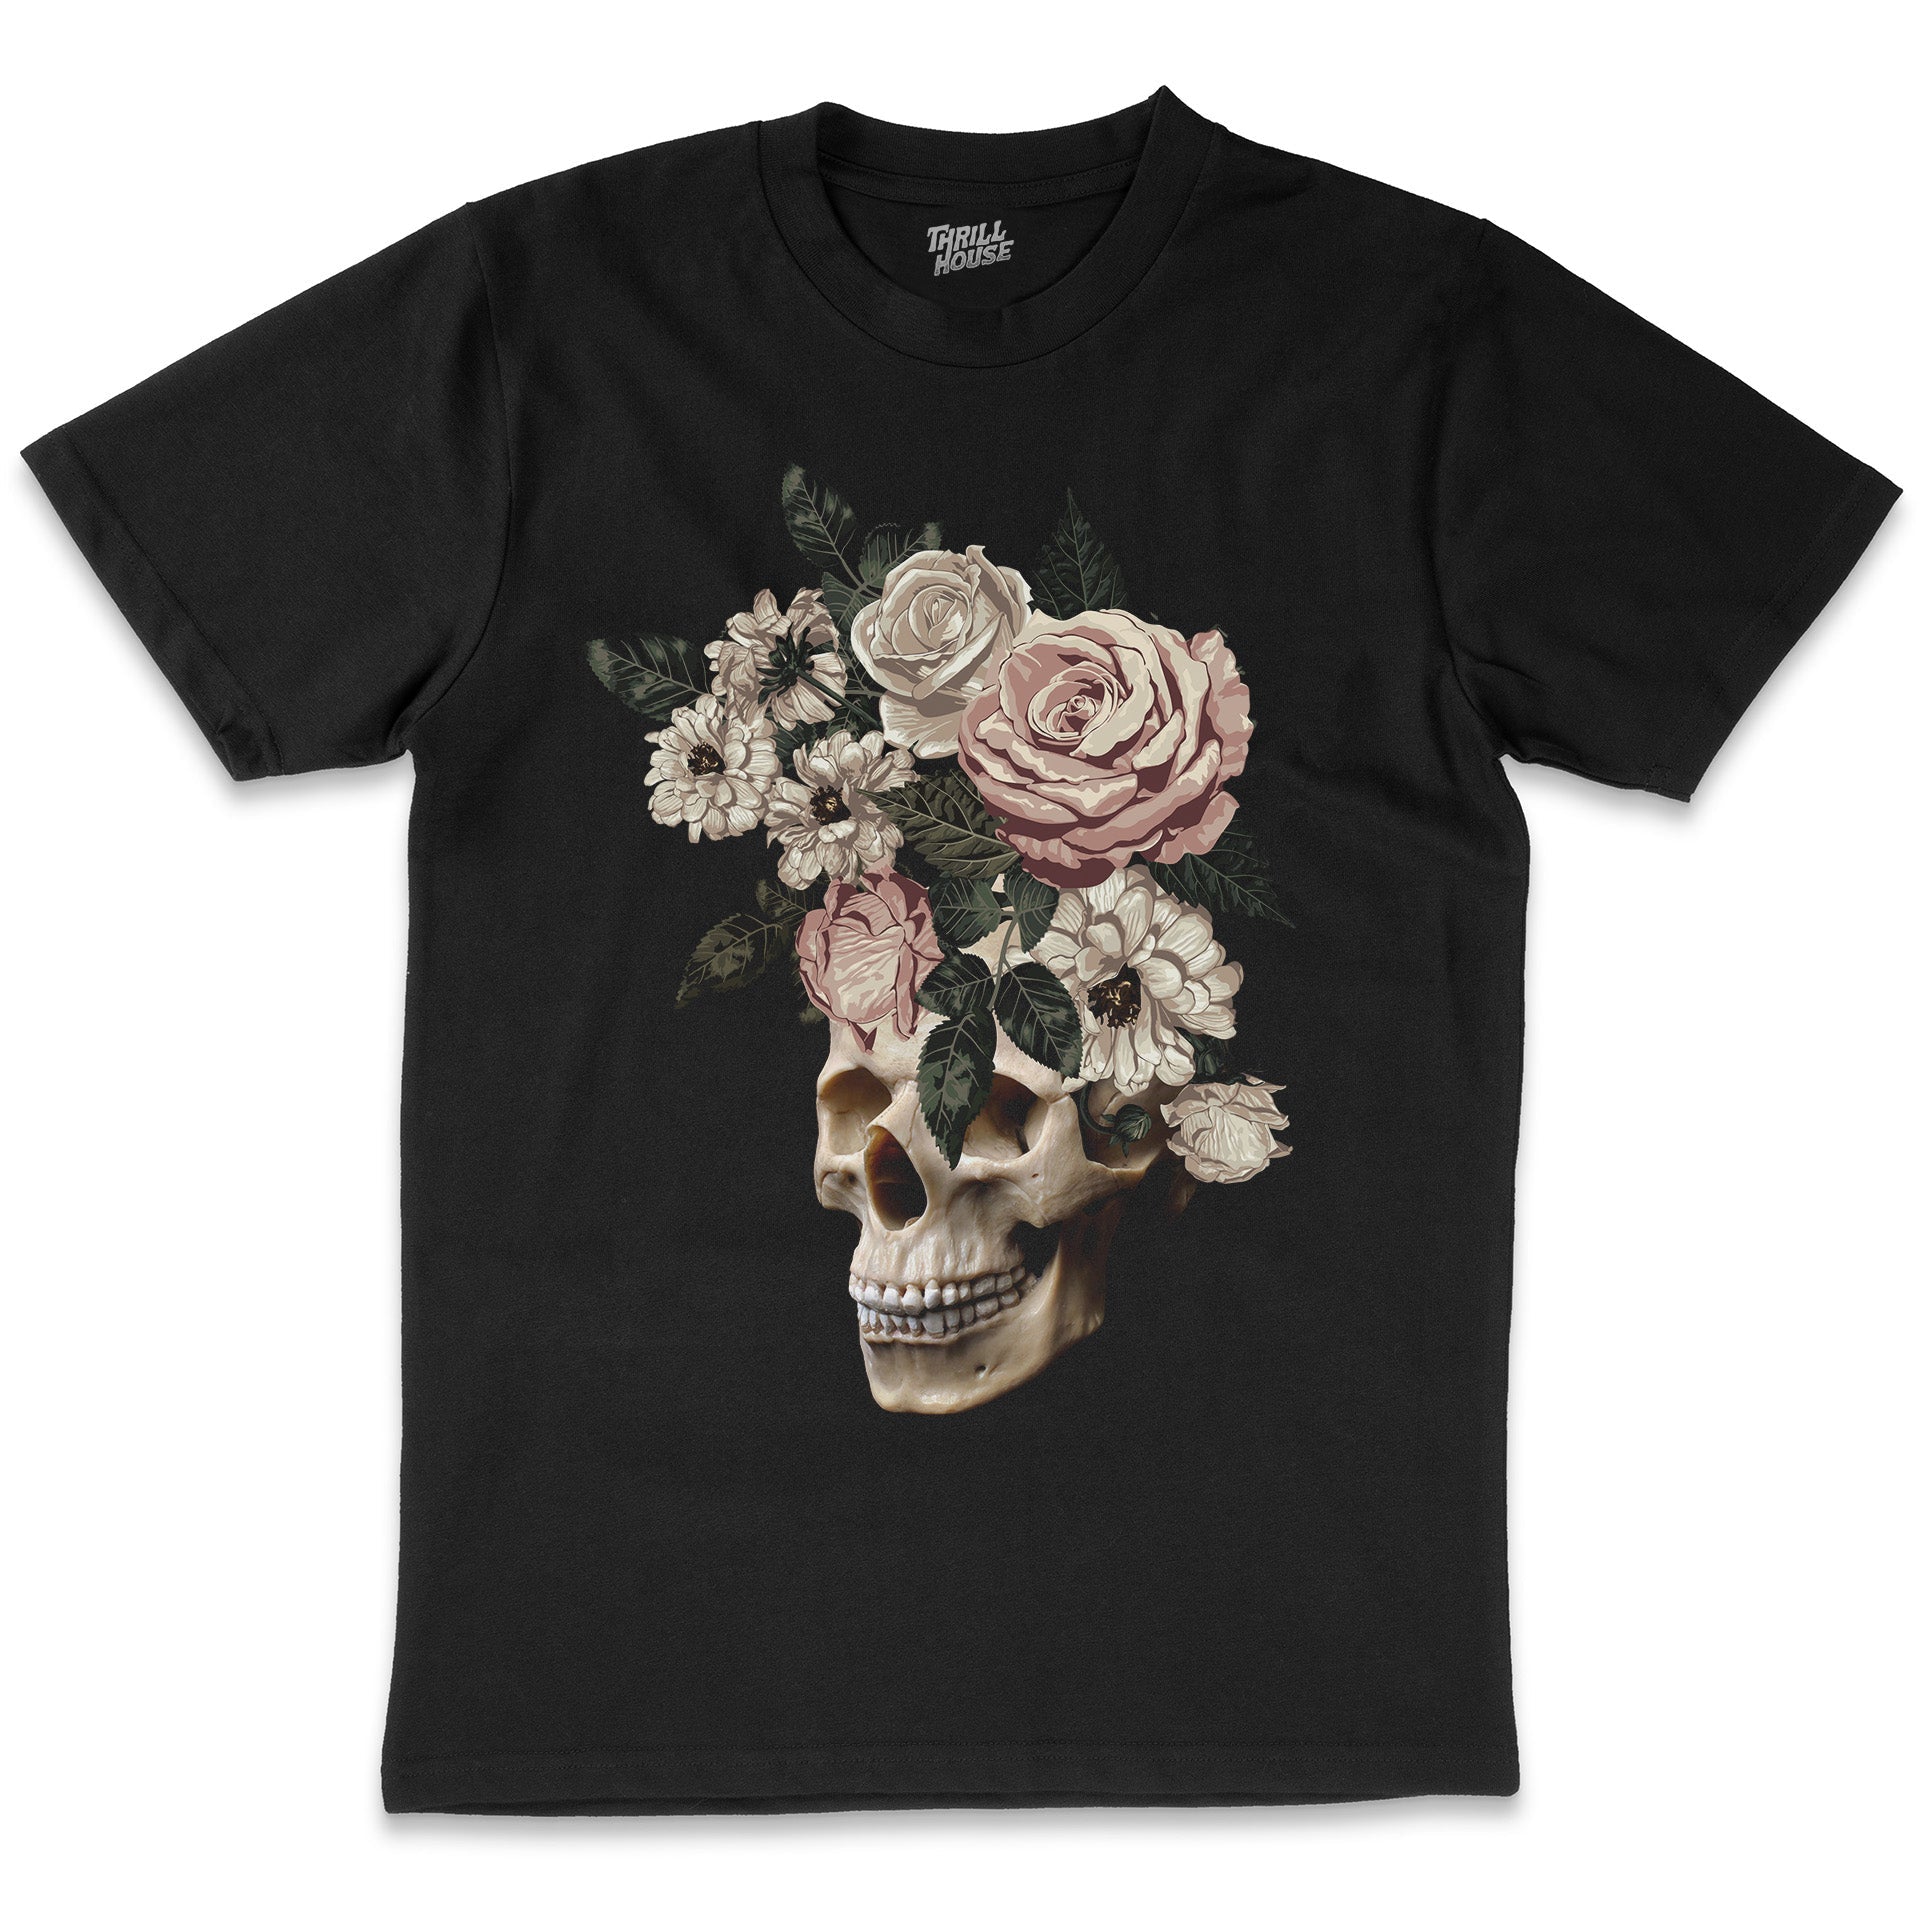 After the Funeral Dark Death Skull Flowers Macabre Tattoo Art Artsy Cool Cotton T-Shirt